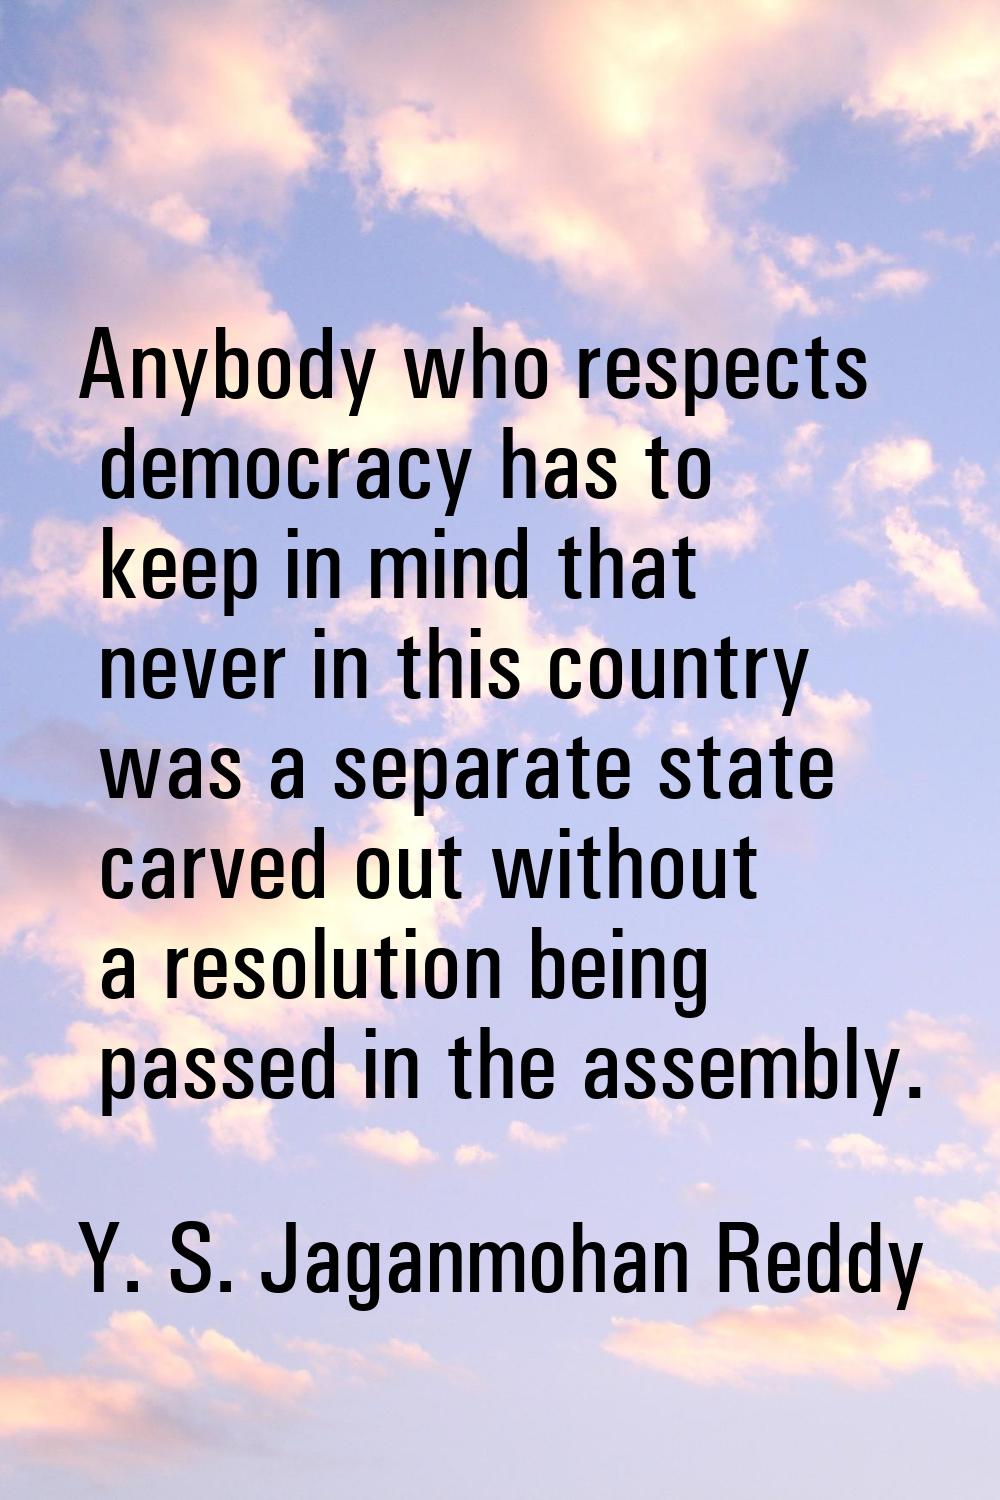 Anybody who respects democracy has to keep in mind that never in this country was a separate state 